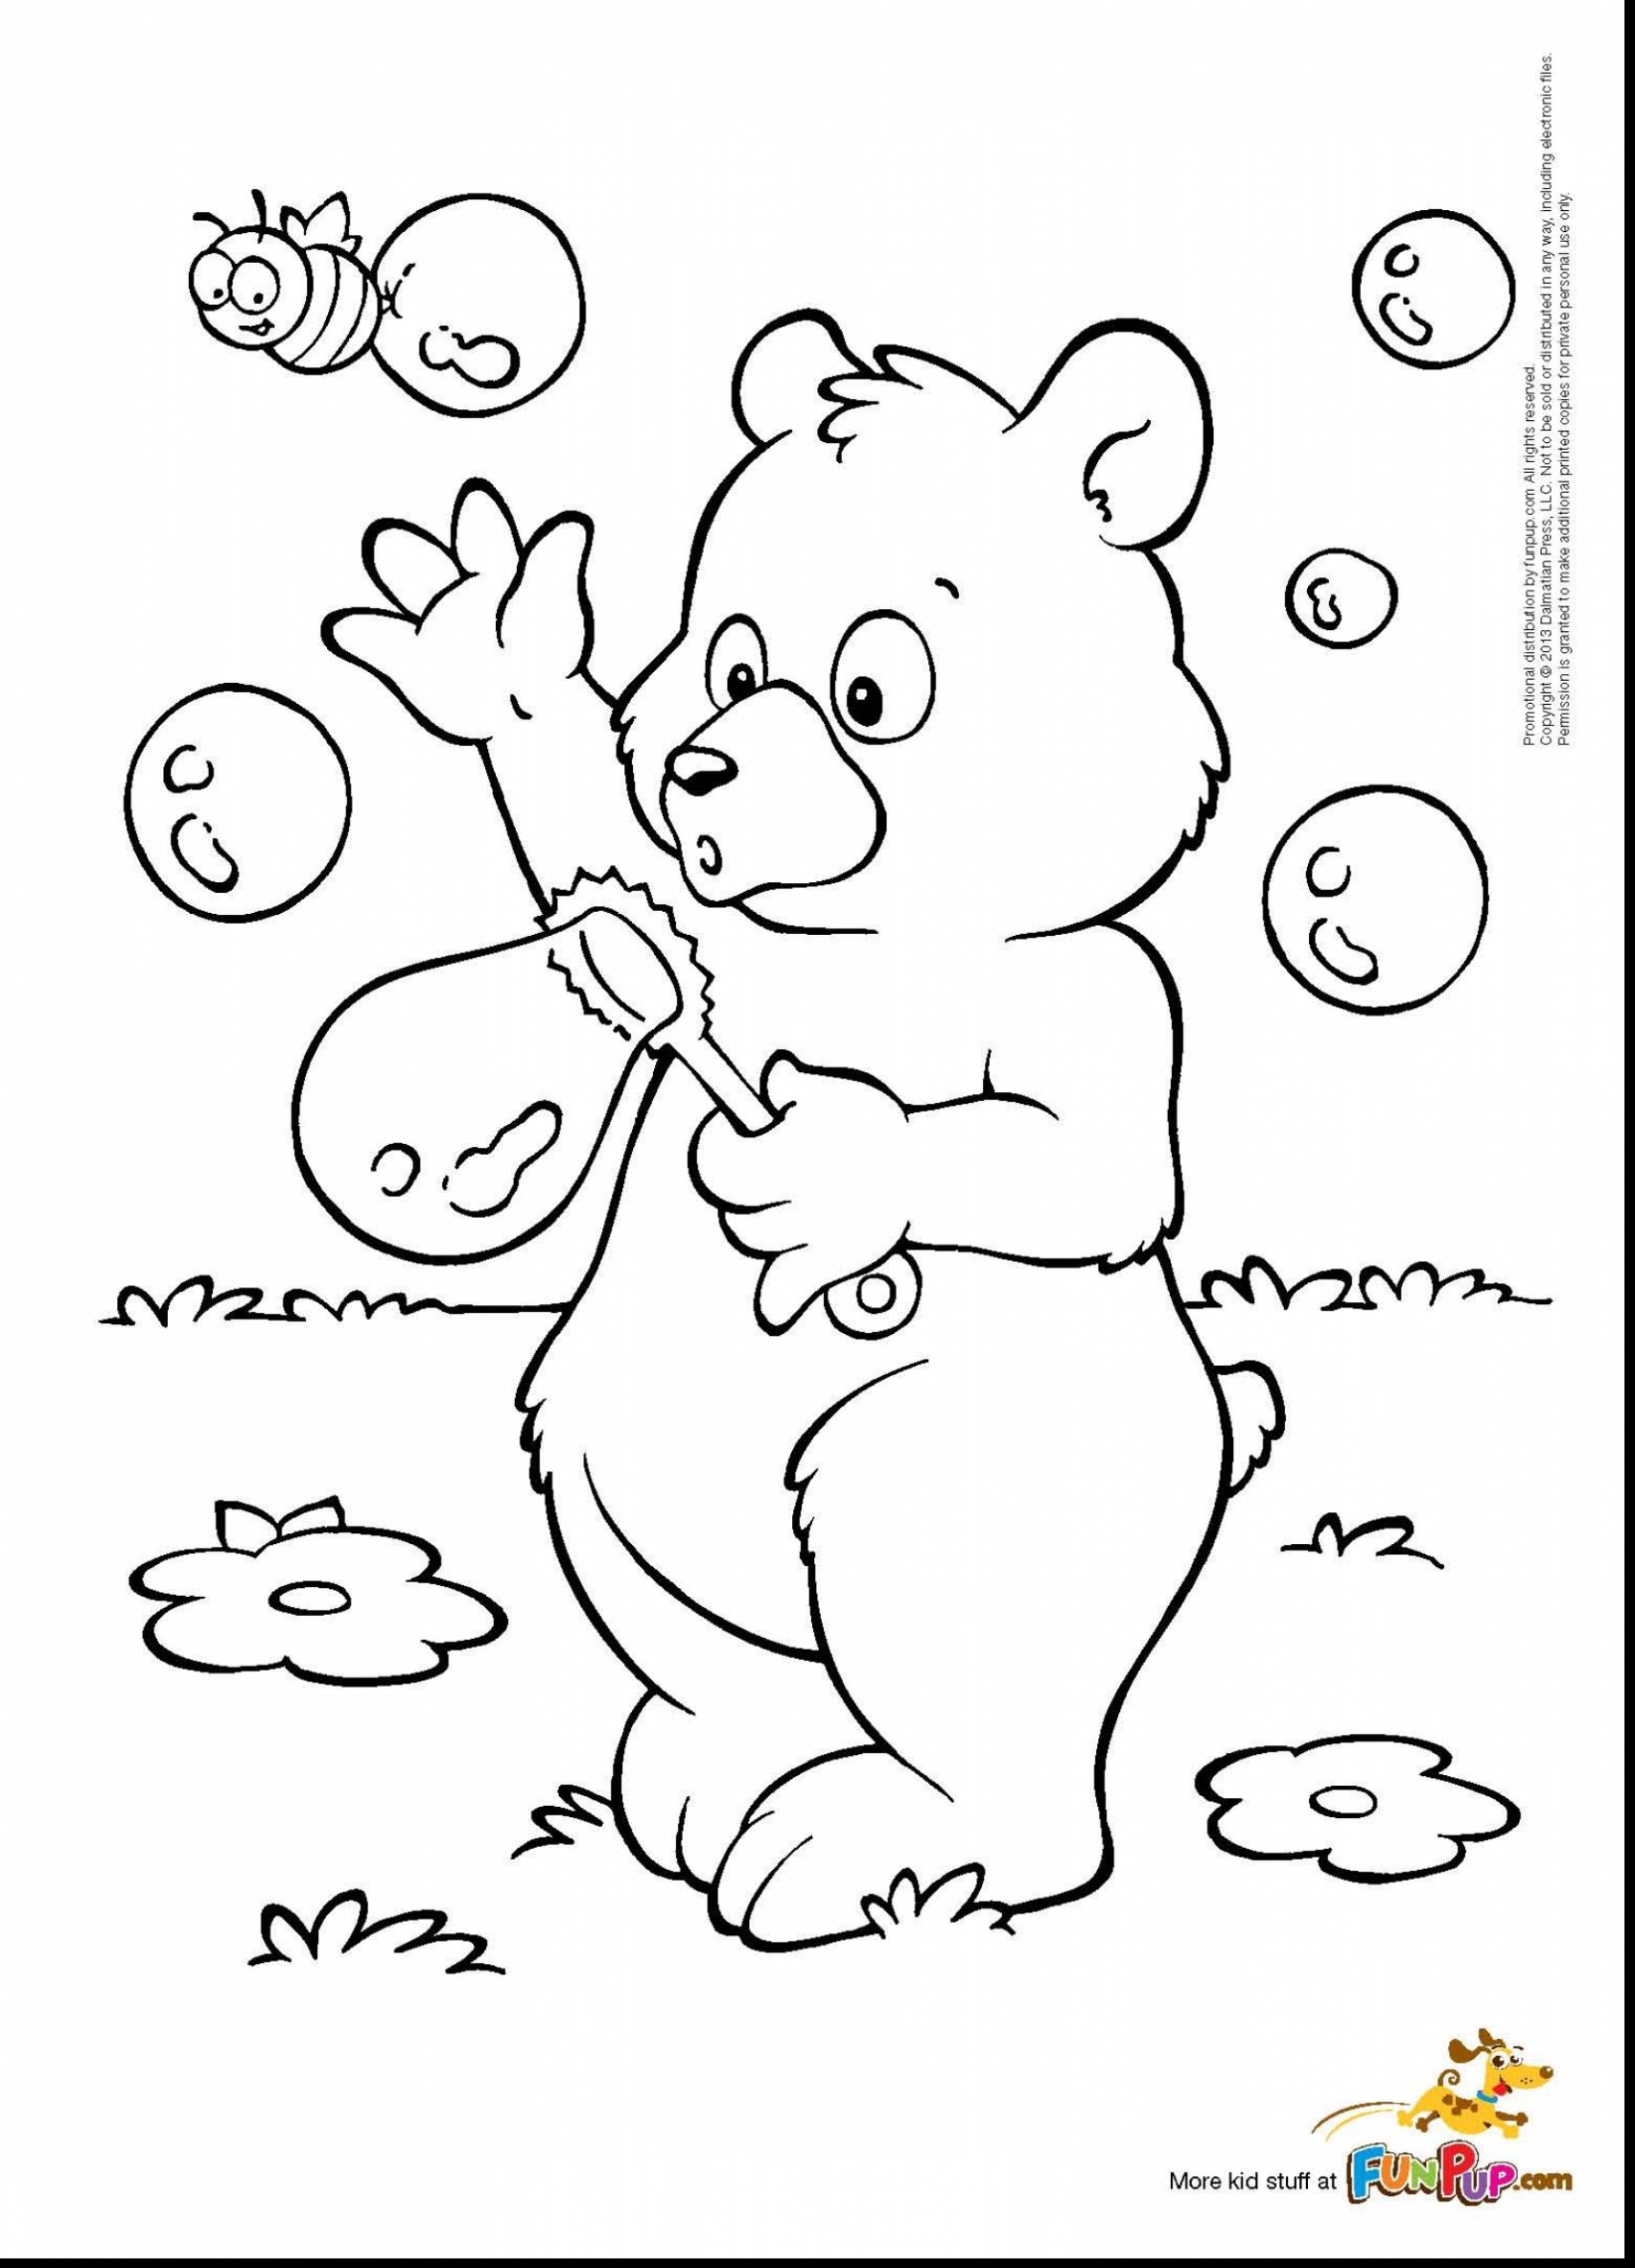 Blowing Bubbles Coloring Pages at GetDrawings | Free download